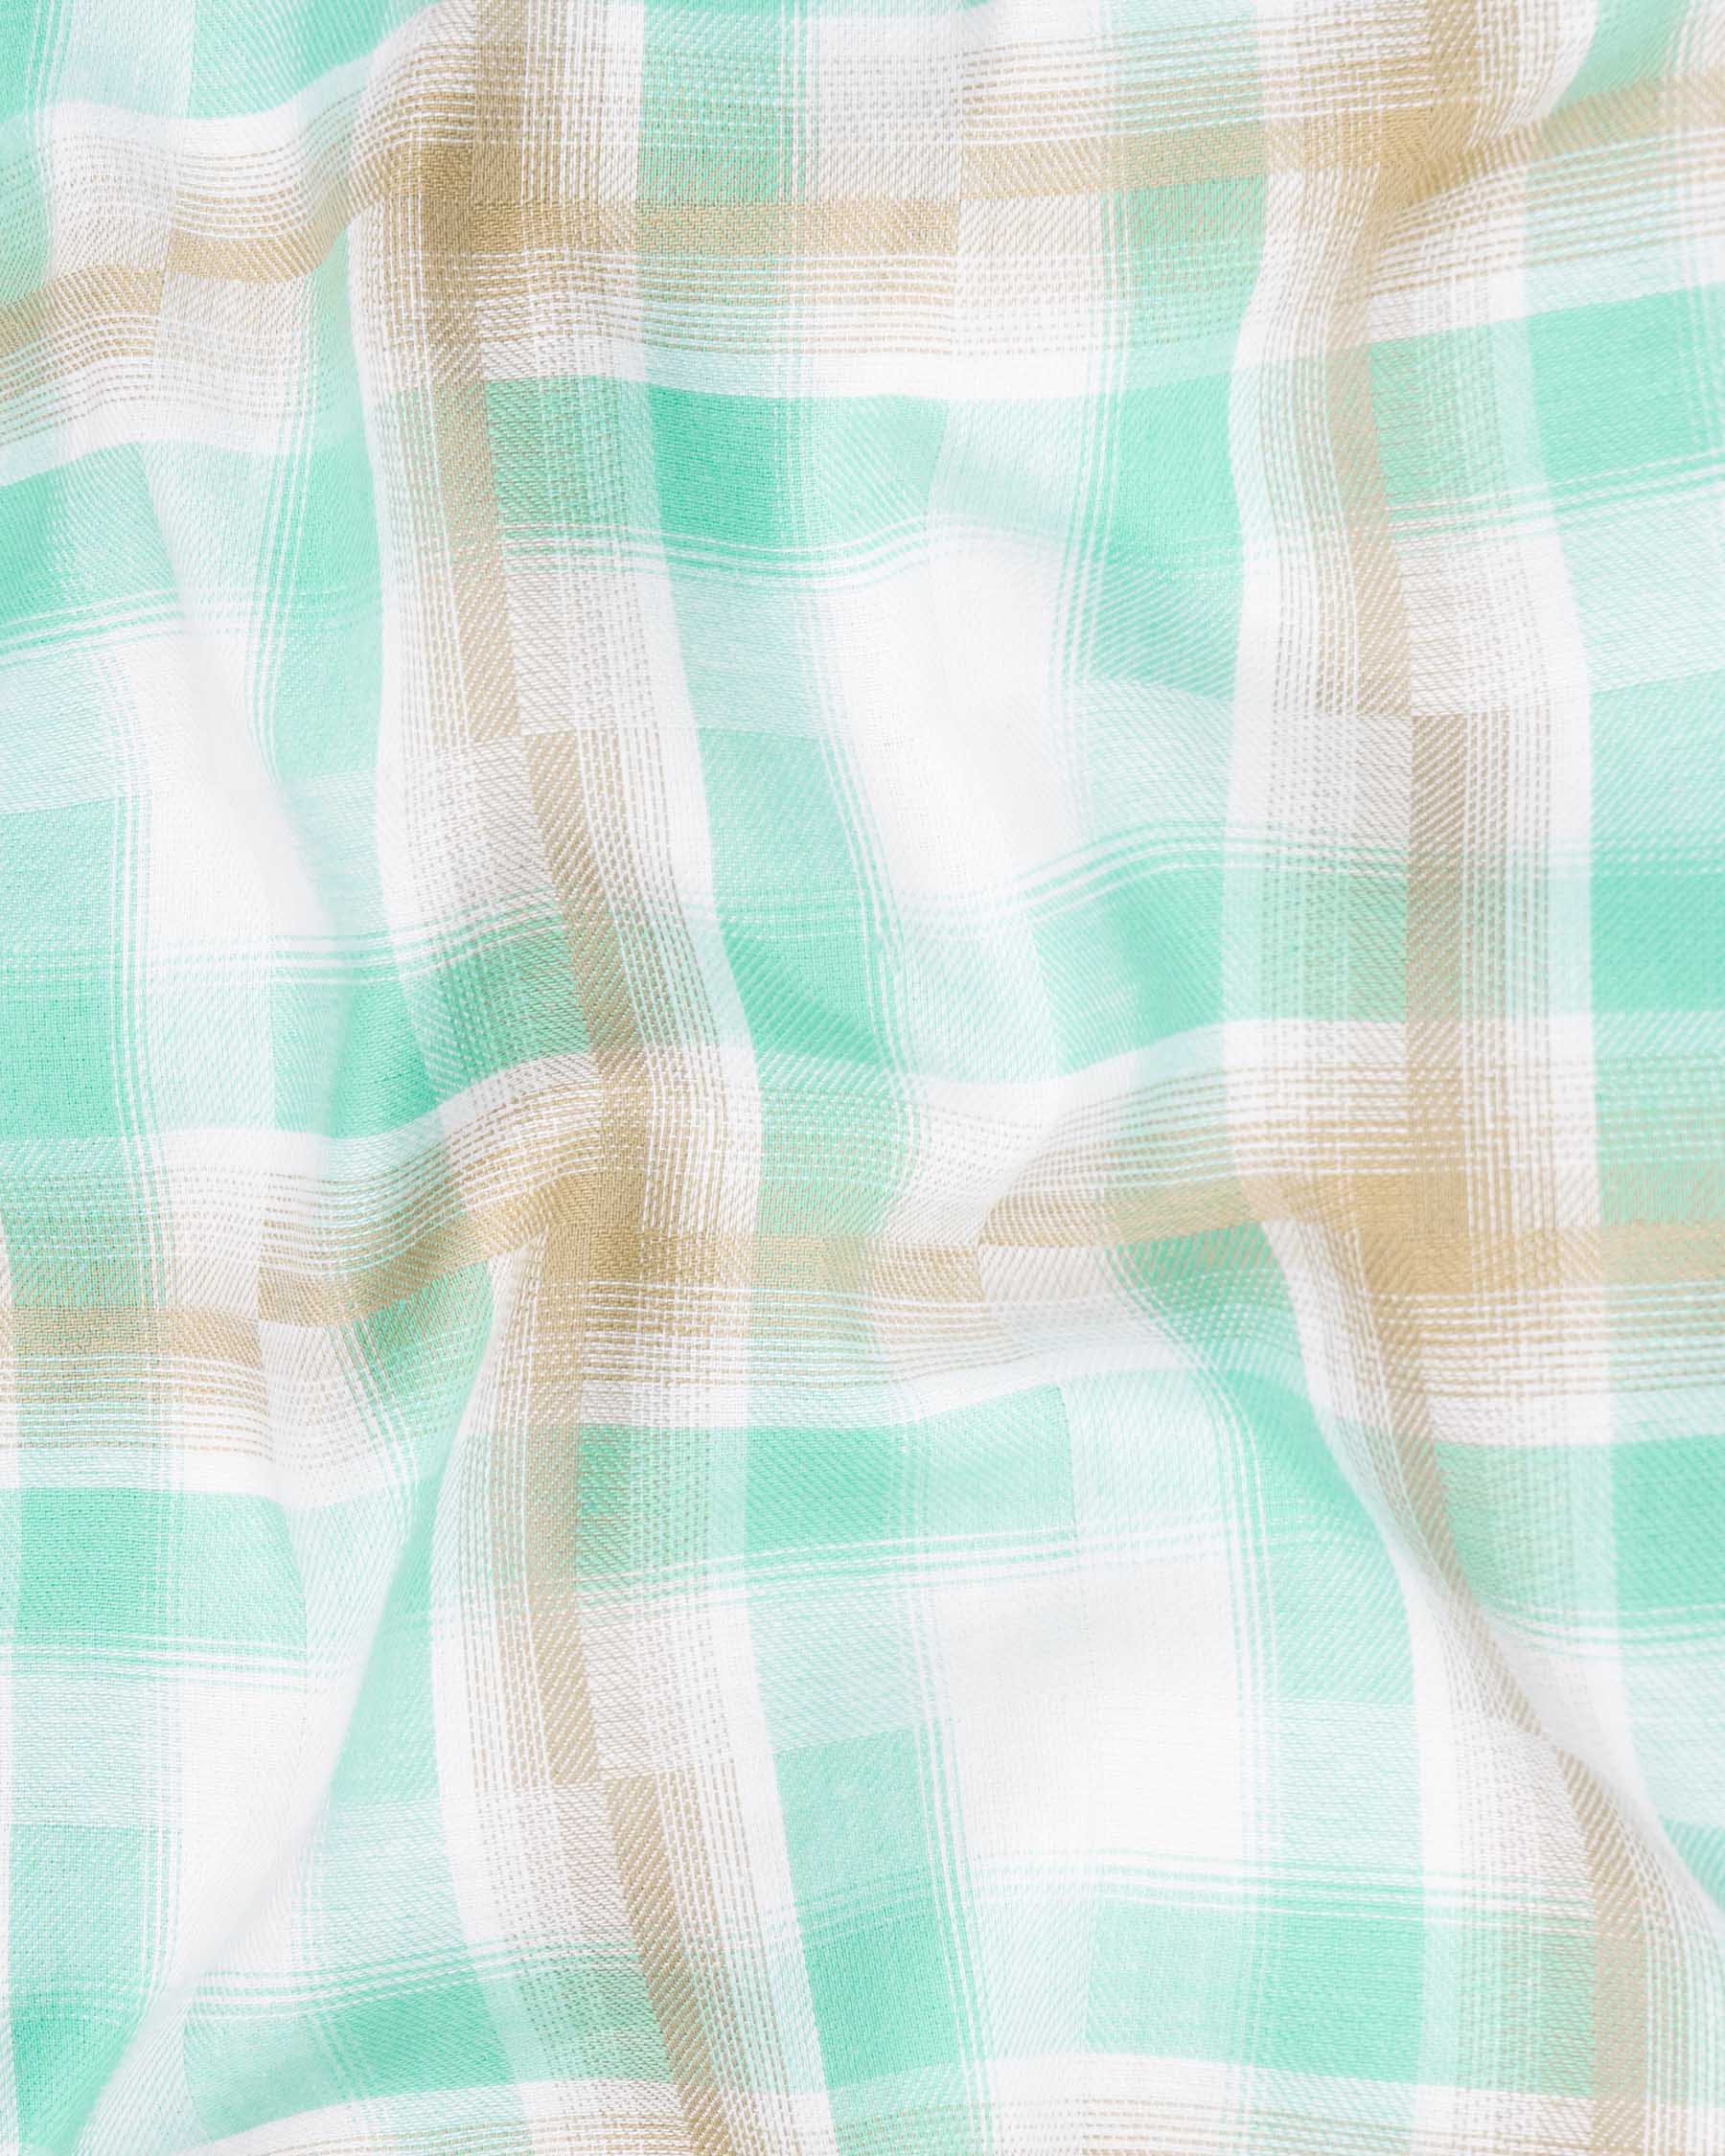 Bright White with Pavlova Brown and Riptide Green Twill Plaid Premium Cotton Shirt 6221-BD-BLE-38, 6221-BD-BLE-H-38, 6221-BD-BLE-39, 6221-BD-BLE-H-39, 6221-BD-BLE-40, 6221-BD-BLE-H-40, 6221-BD-BLE-42, 6221-BD-BLE-H-42, 6221-BD-BLE-44, 6221-BD-BLE-H-44, 6221-BD-BLE-46, 6221-BD-BLE-H-46, 6221-BD-BLE-48, 6221-BD-BLE-H-48, 6221-BD-BLE-50, 6221-BD-BLE-H-50, 6221-BD-BLE-52, 6221-BD-BLE-H-52